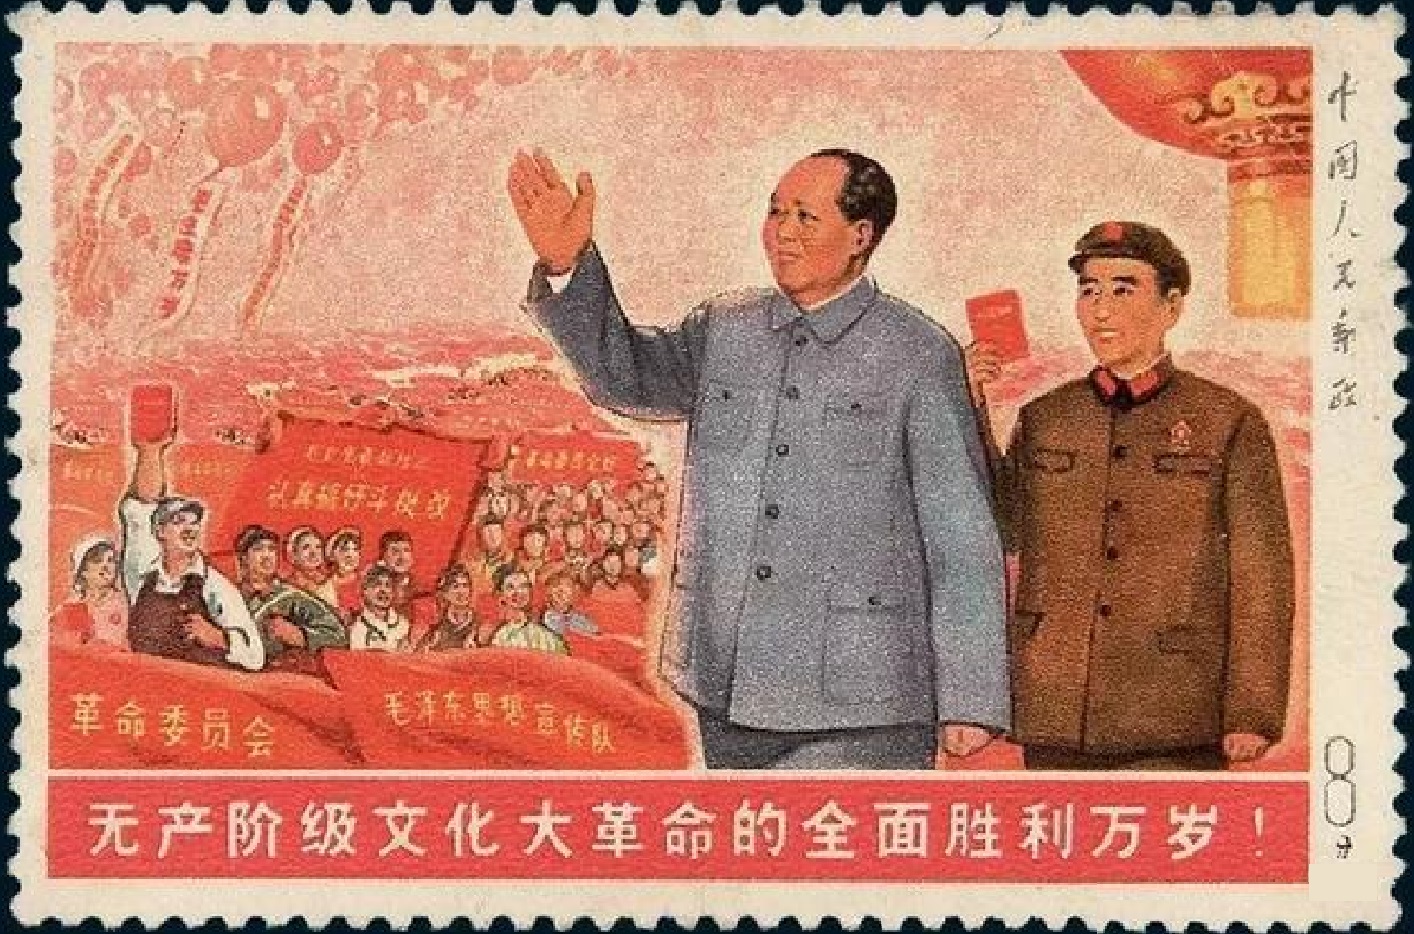 Chinese stamps: Long live the full victory of the Great Proletarian 